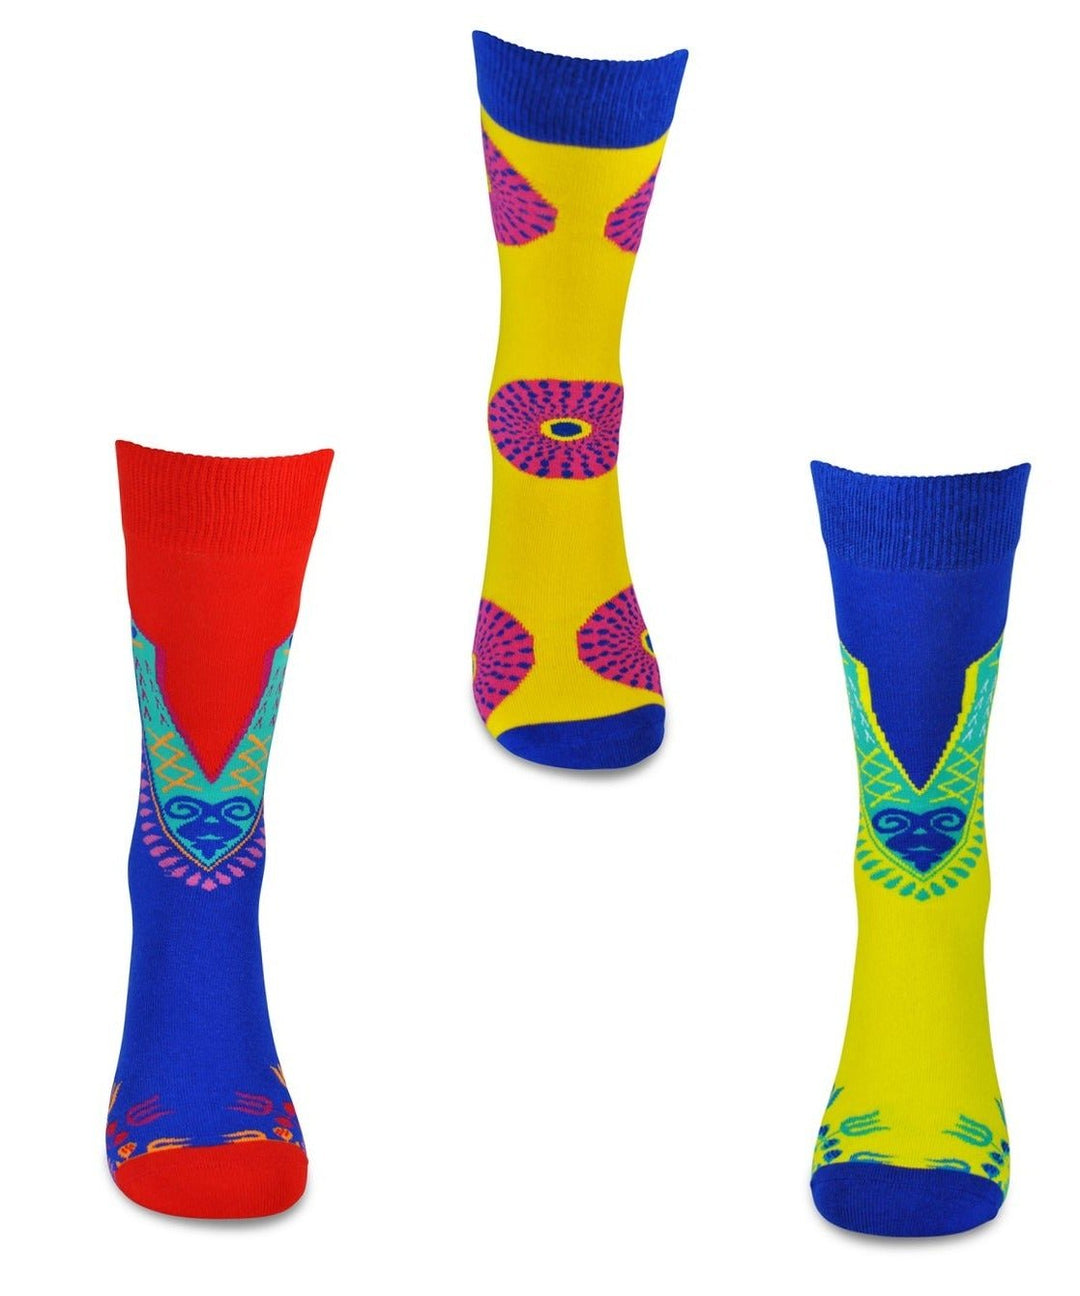 Premium Quality African Dashiki Pattern Socks for Dress or Casual Novelty | 3 Pack Bundle No. 1 - Sankofa Edition™